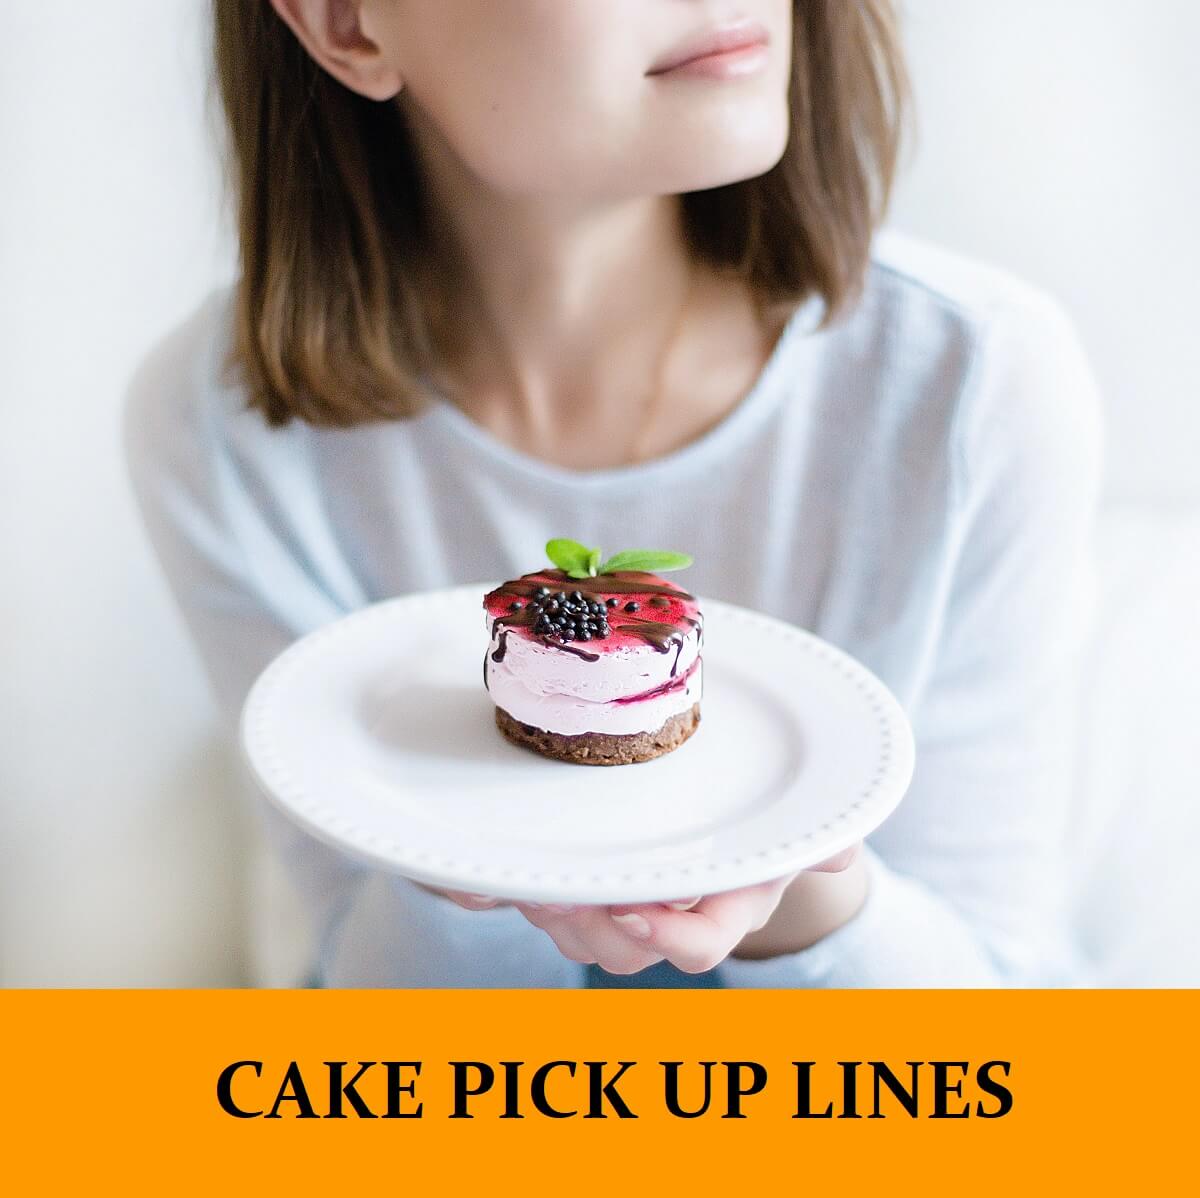 Pick Up Lines About Cakes